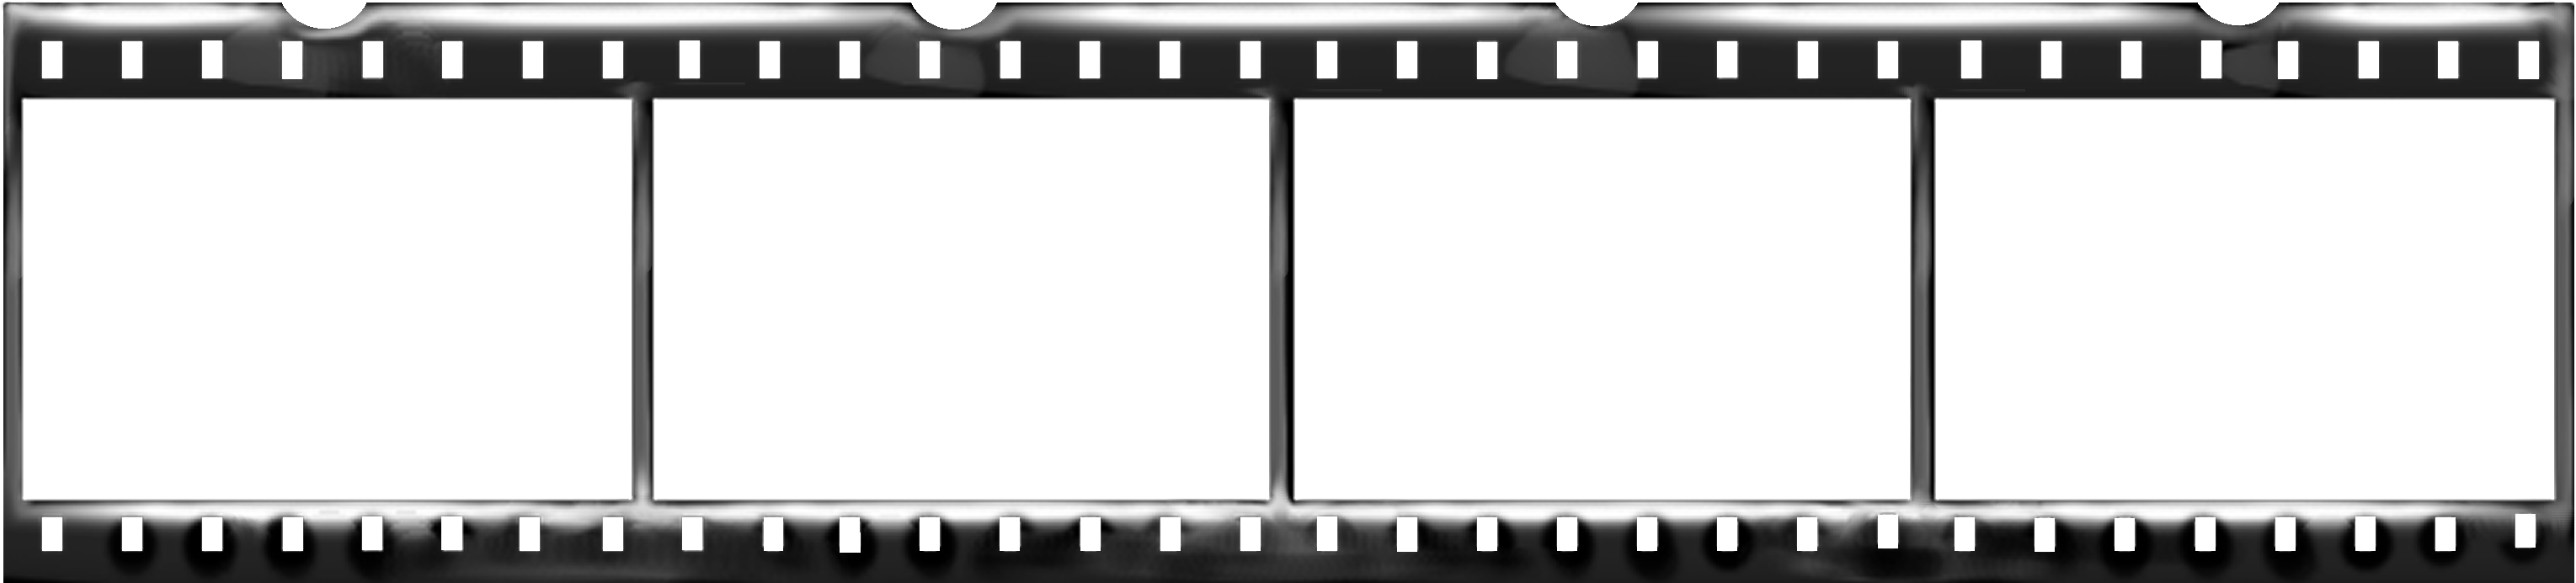 A Film Strip With A Black Background